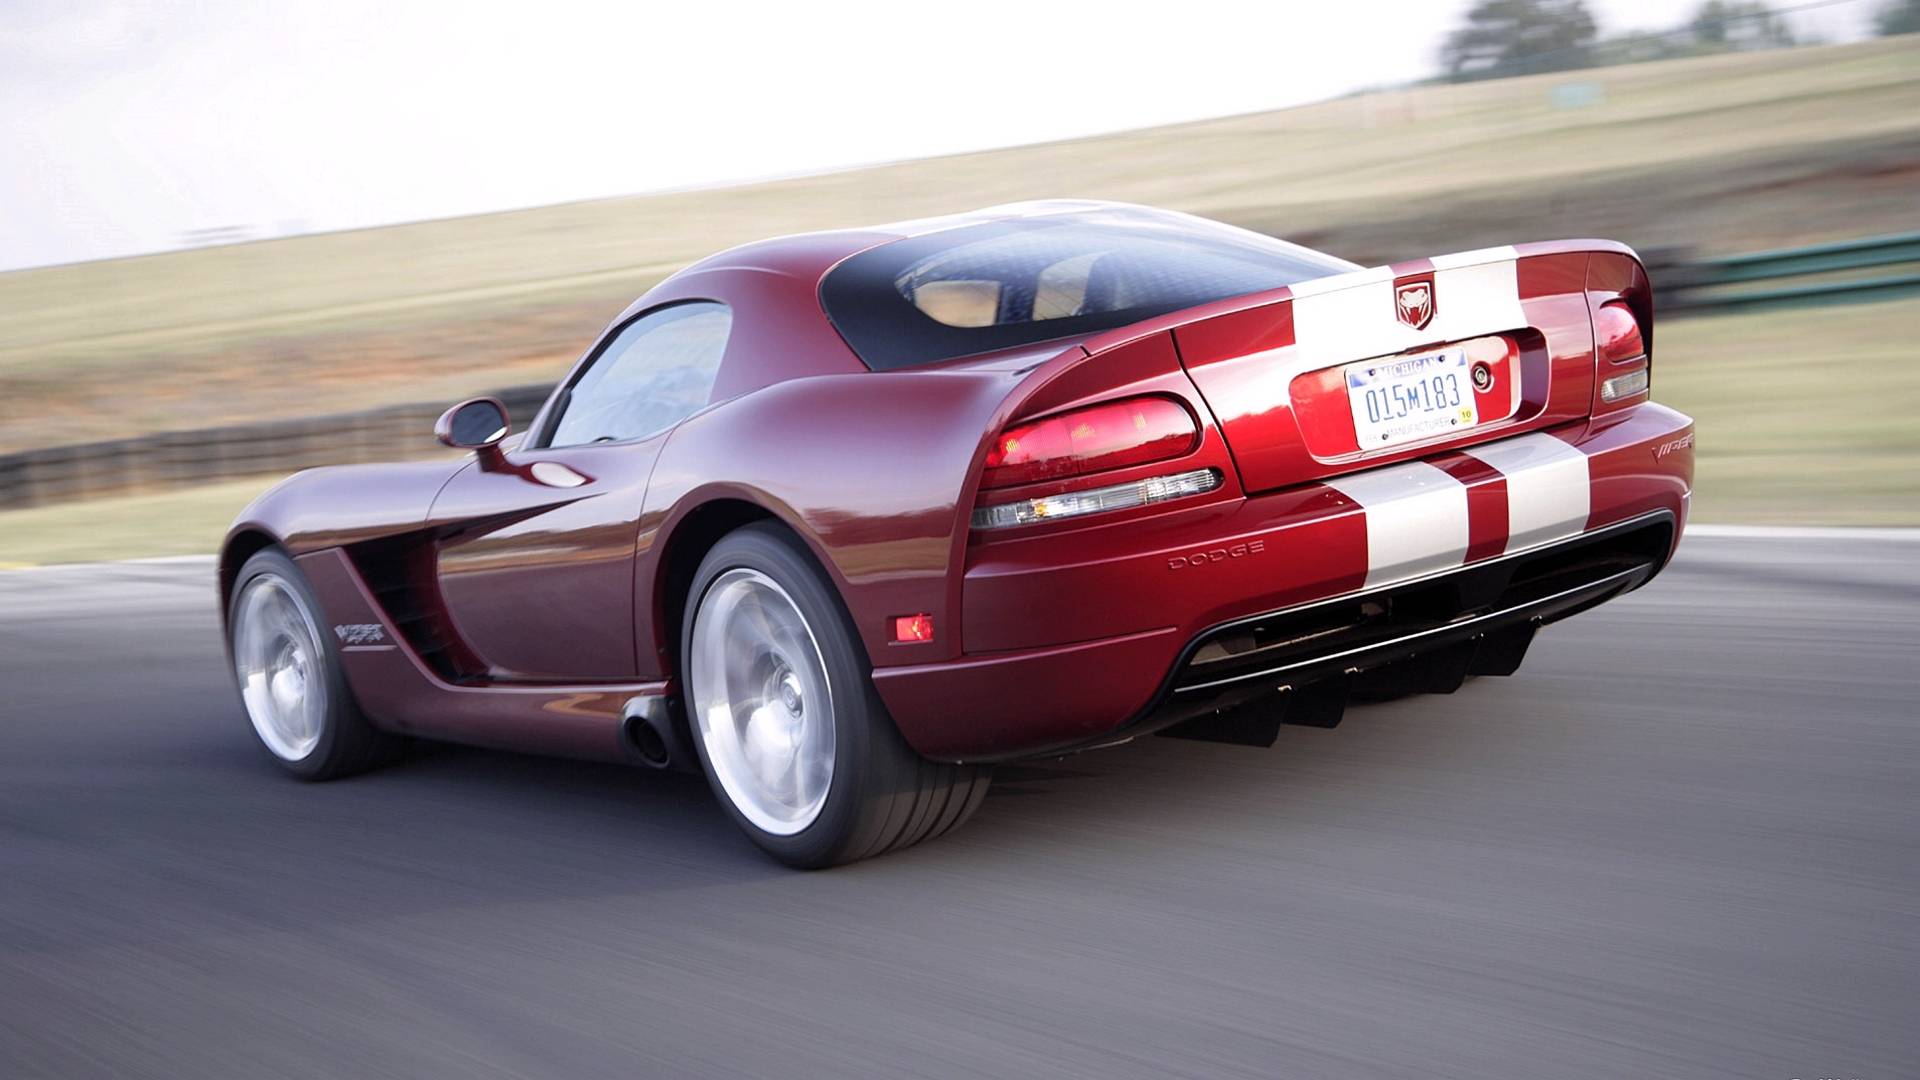 Wallpapers Dodge viper sports car air intakes on the desktop